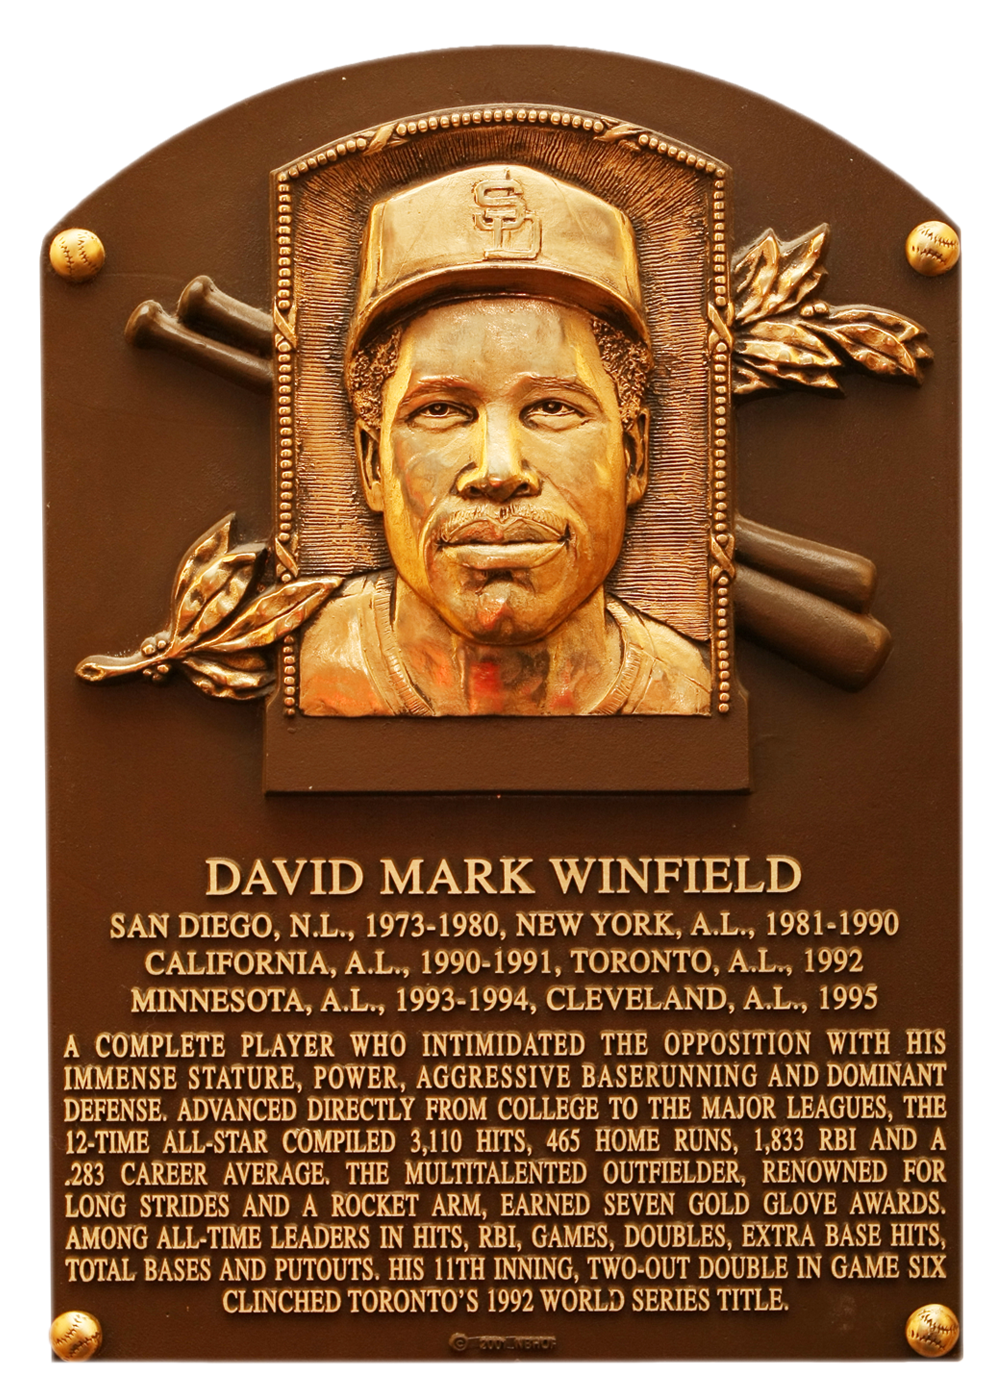 Dave Winfield Hall of Fame plaque